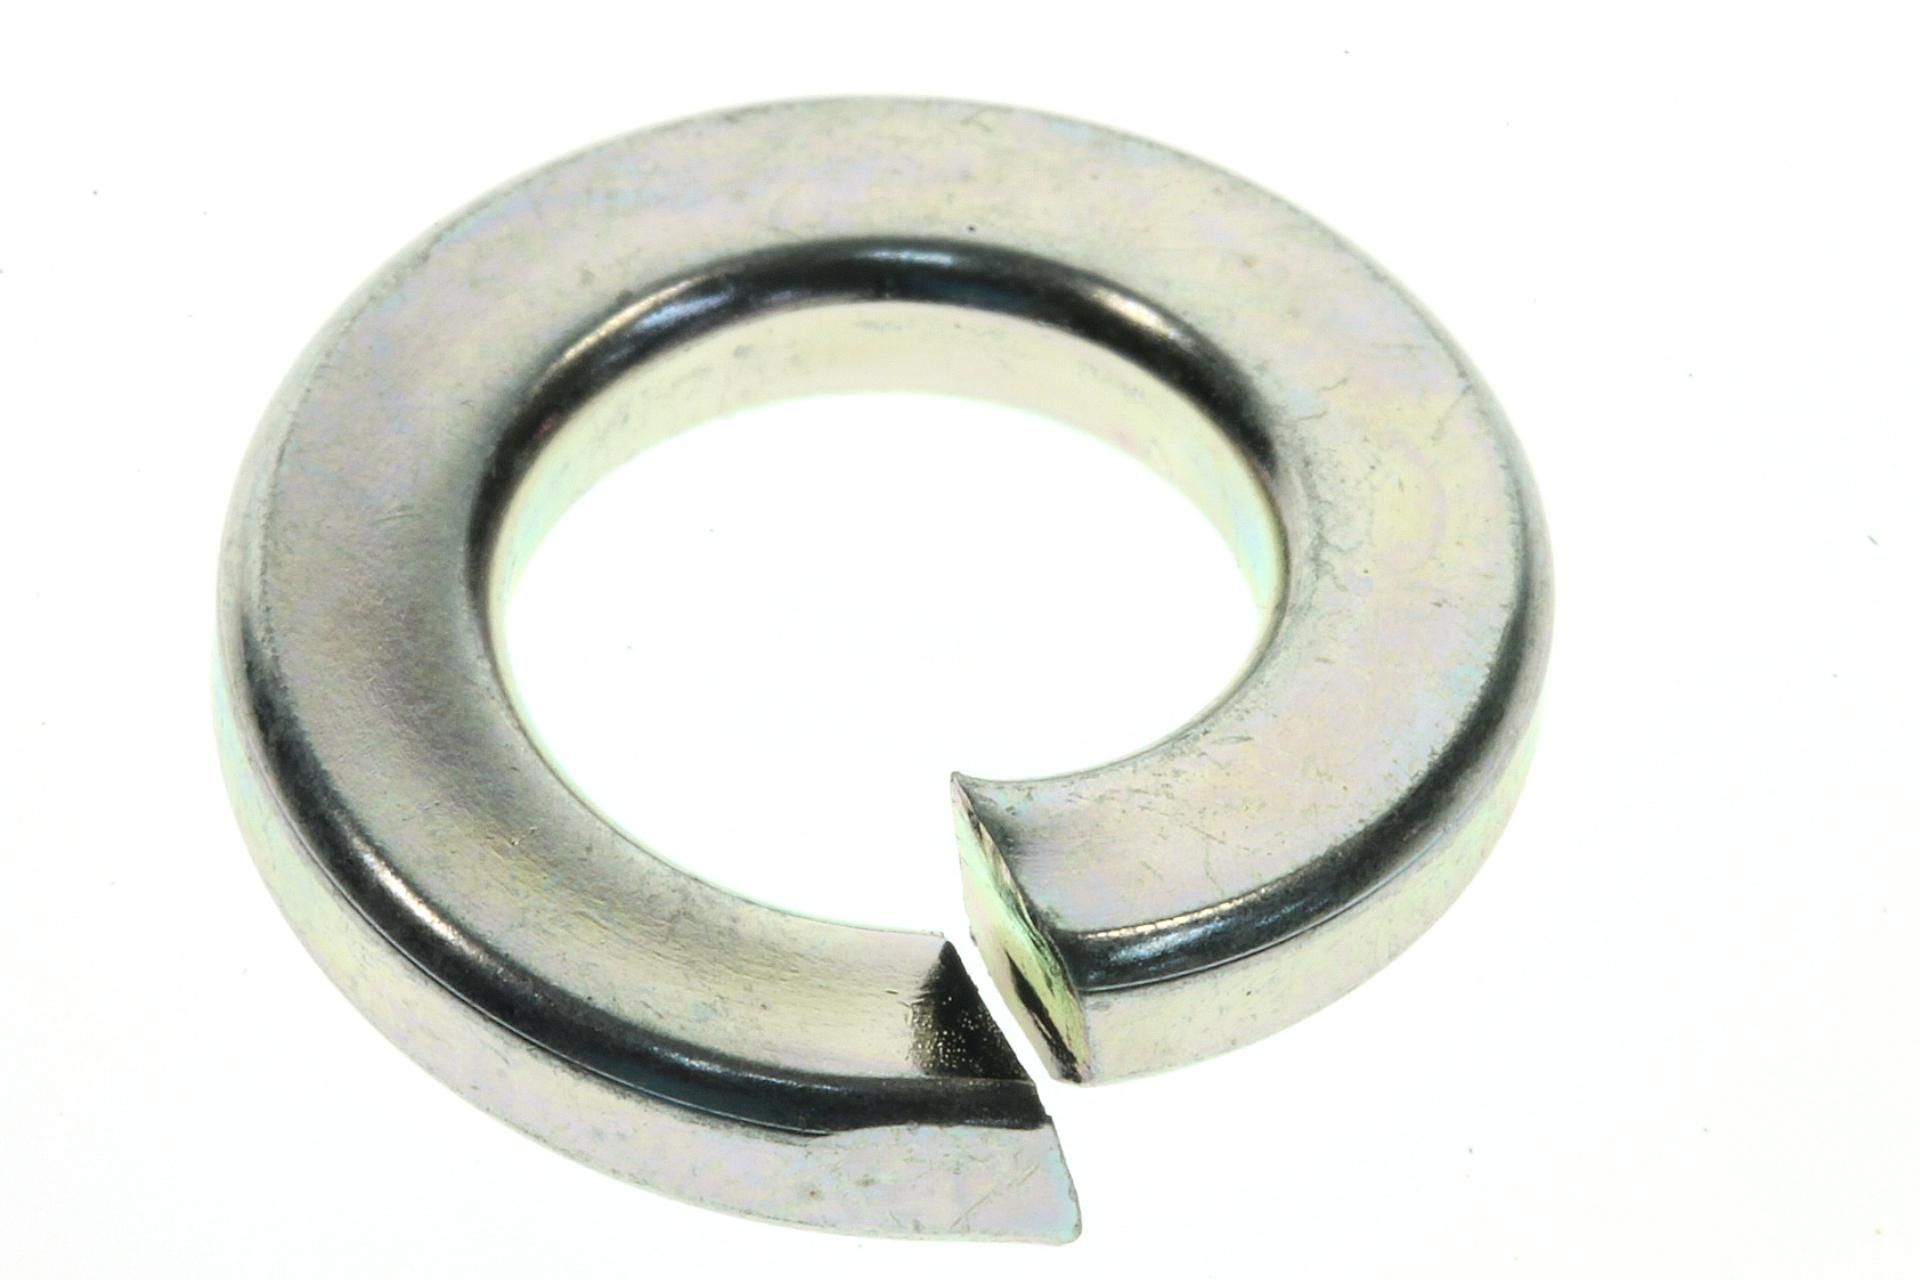 08321-31105 Superseded by 08321-0110A - WASHER,LOCK